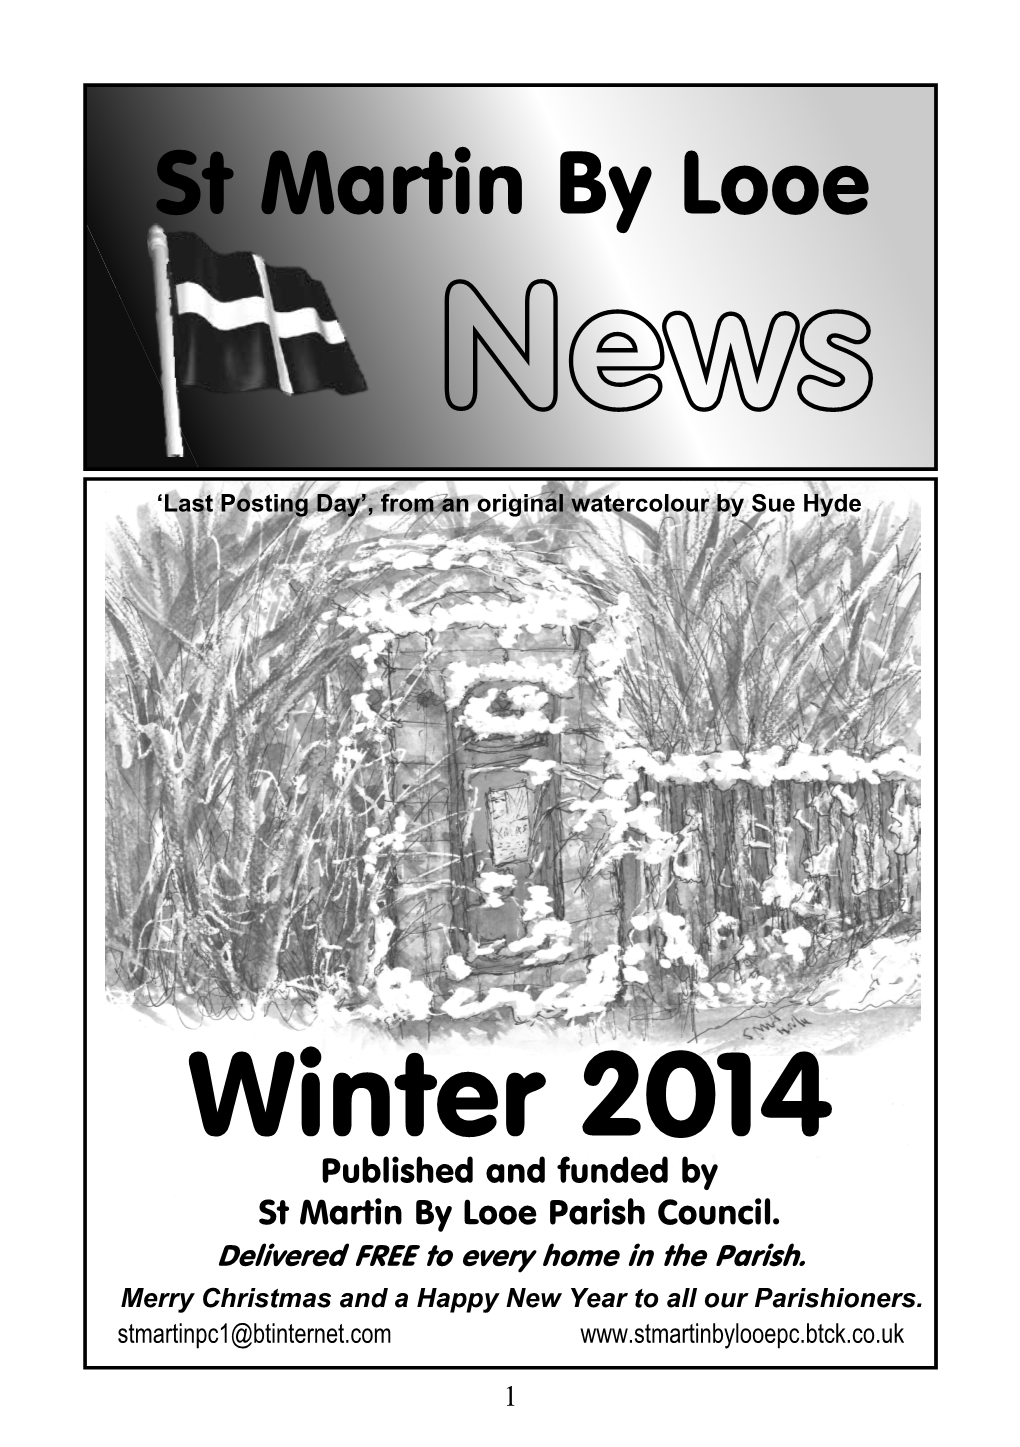 Winter 2014 Published and Funded by St Martin by Looe Parish Council